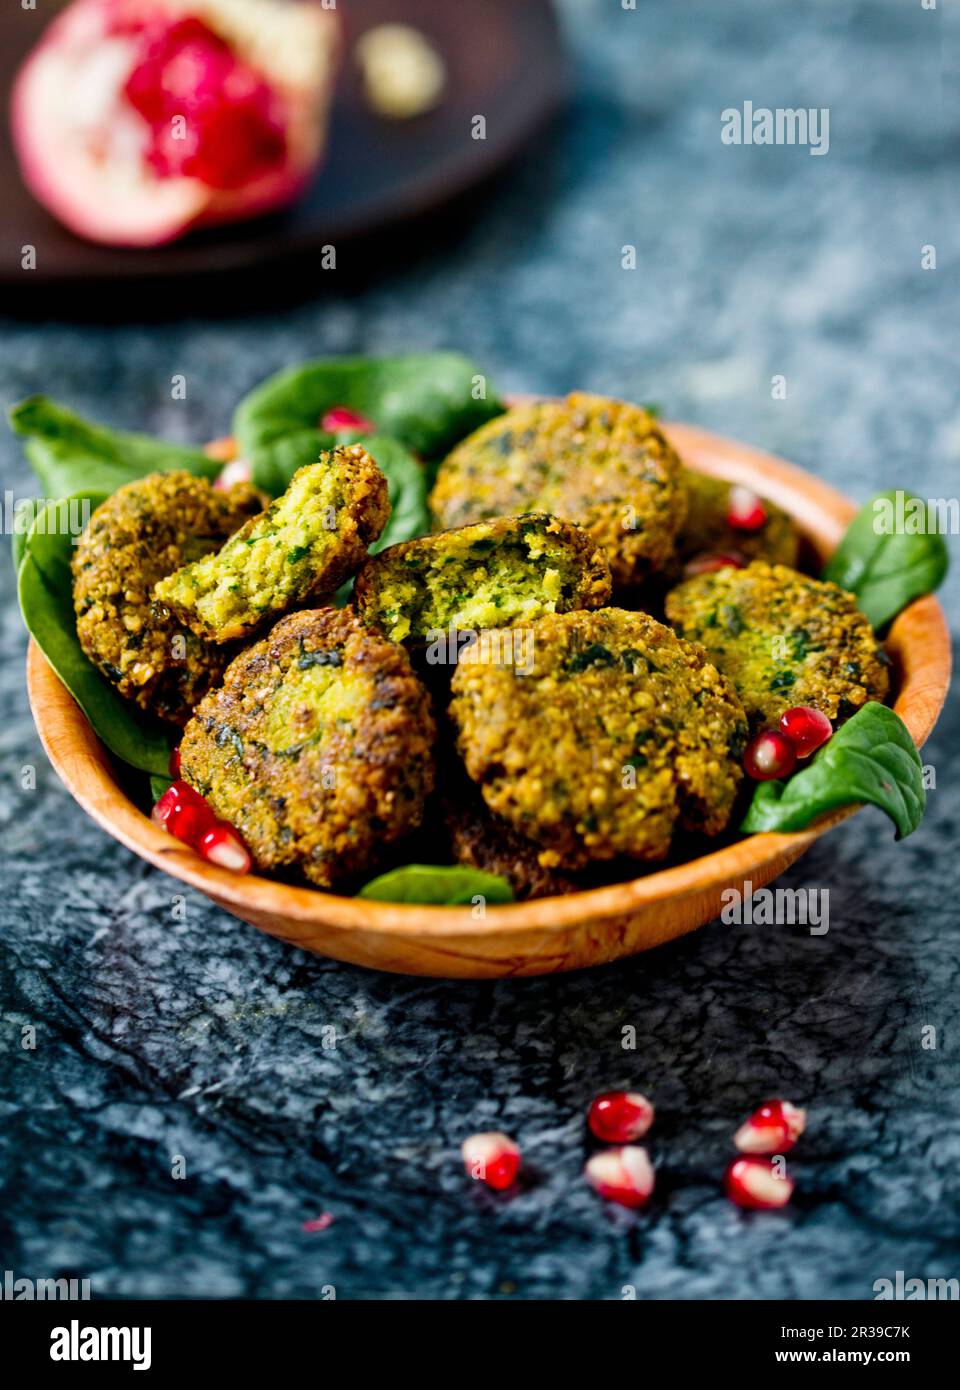 Herb Falafel with pomegranate Stock Photo